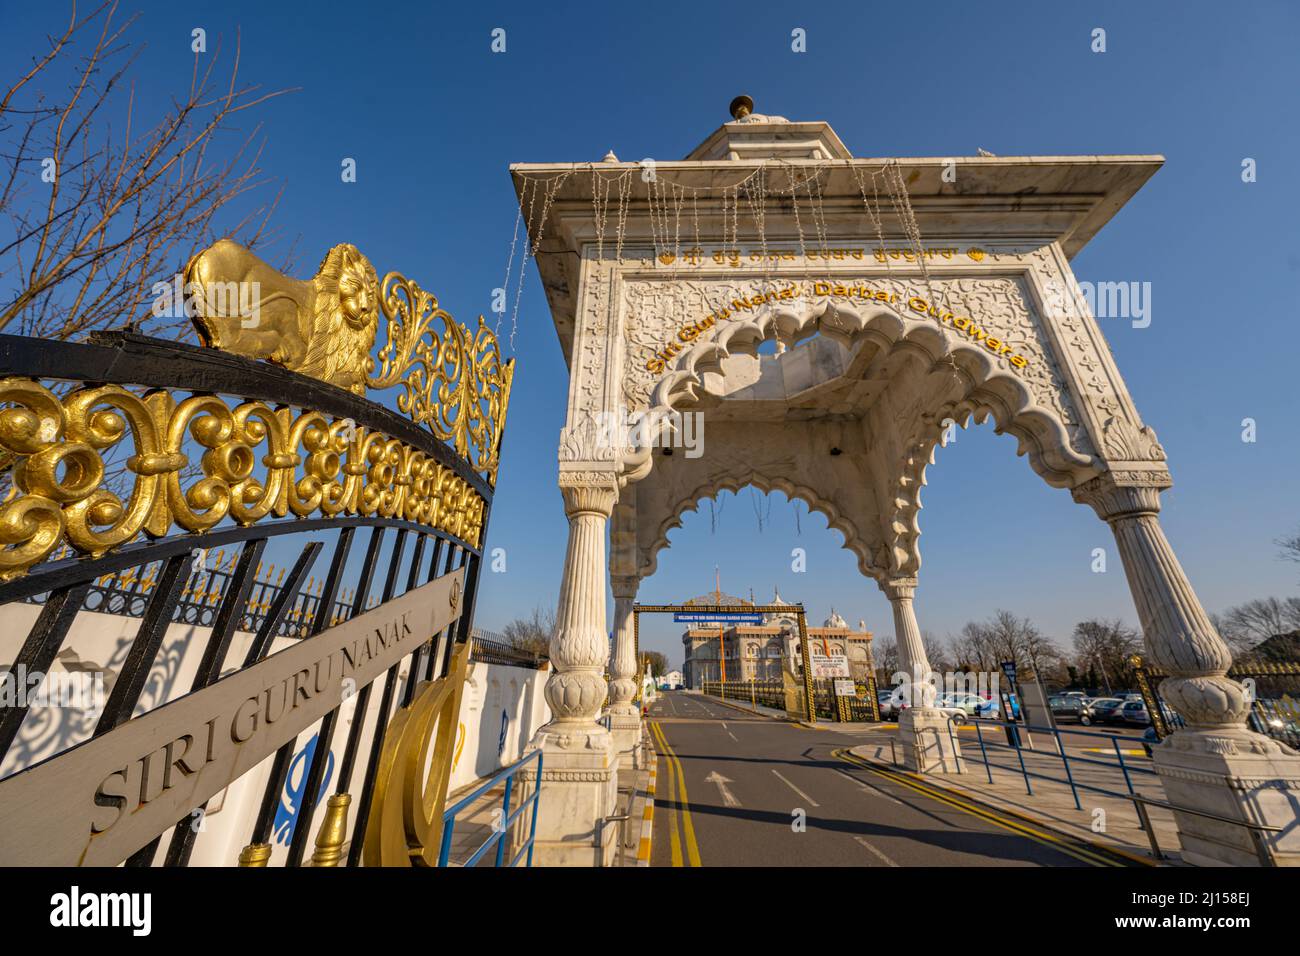 The entrance to the Sikh temple in Gravesend Kent. Stock Photo